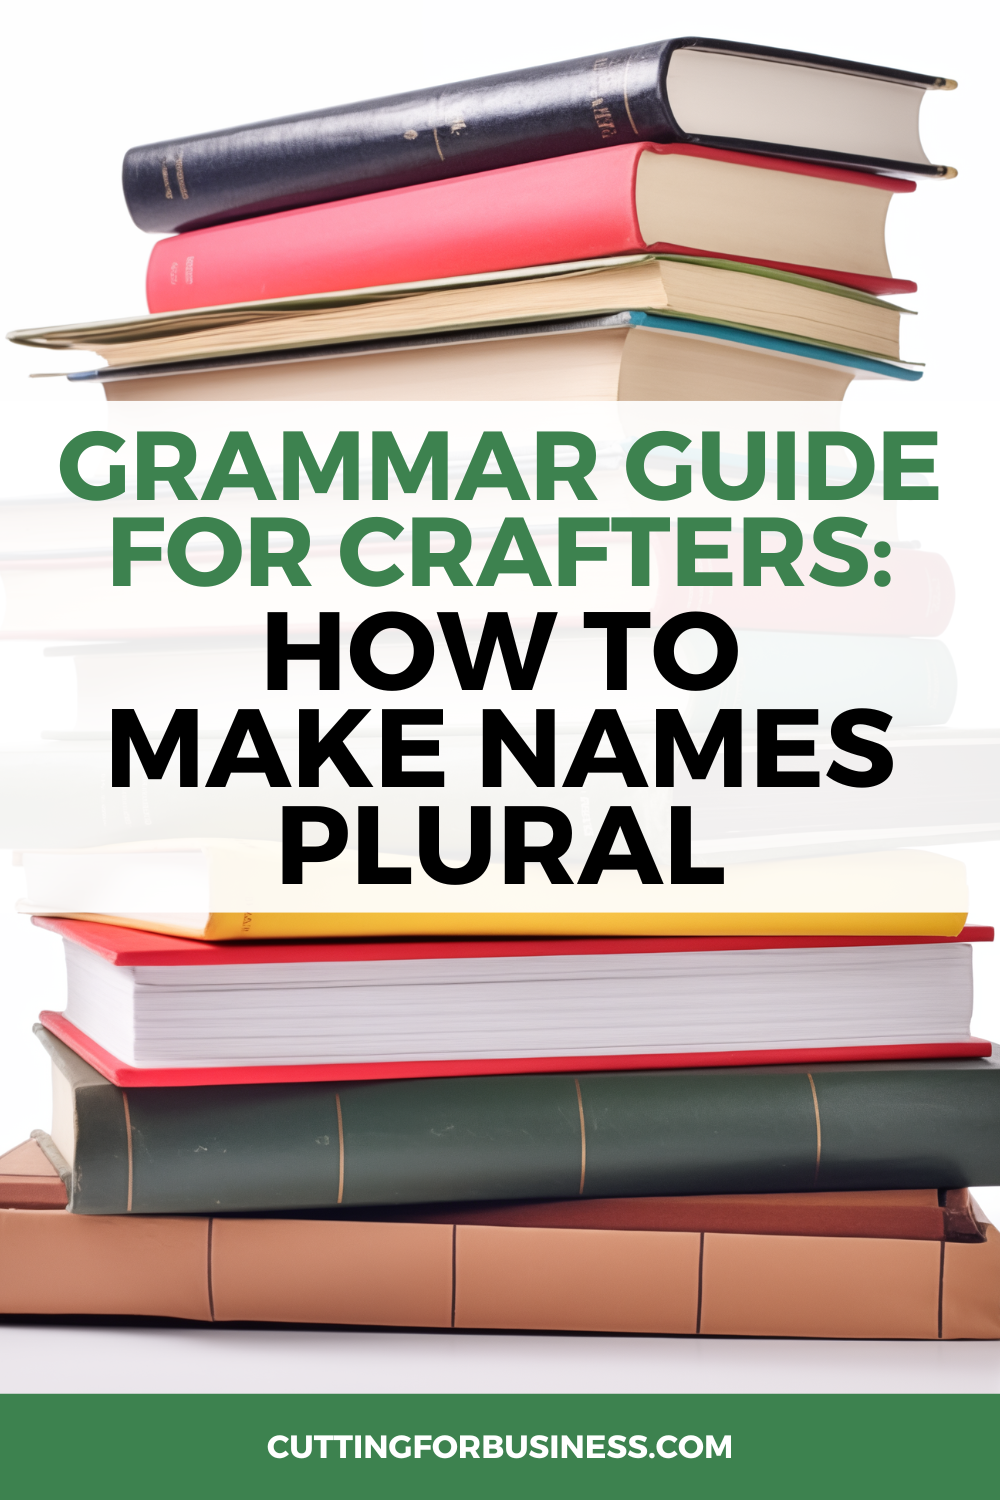 Grammar Guide for Crafters: How to Make Names Plural in Craft Projects - cuttingforbusiness.com